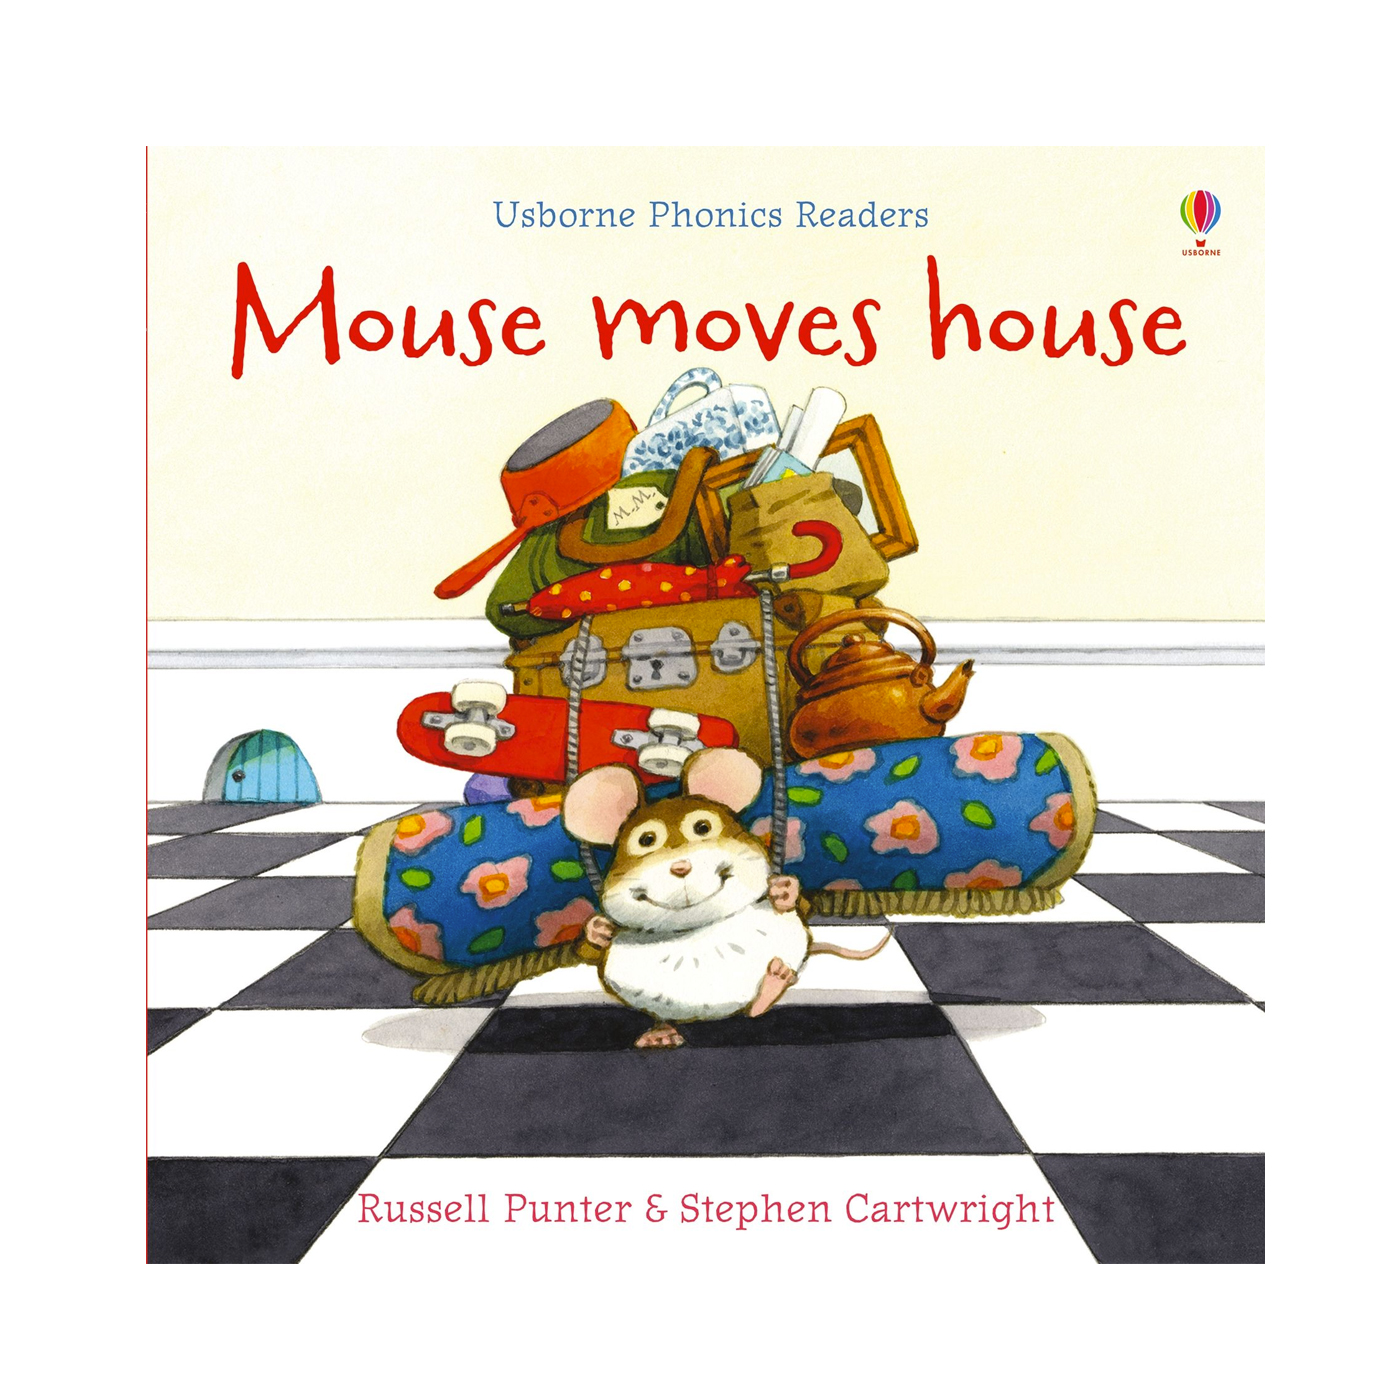  Mouse moves house